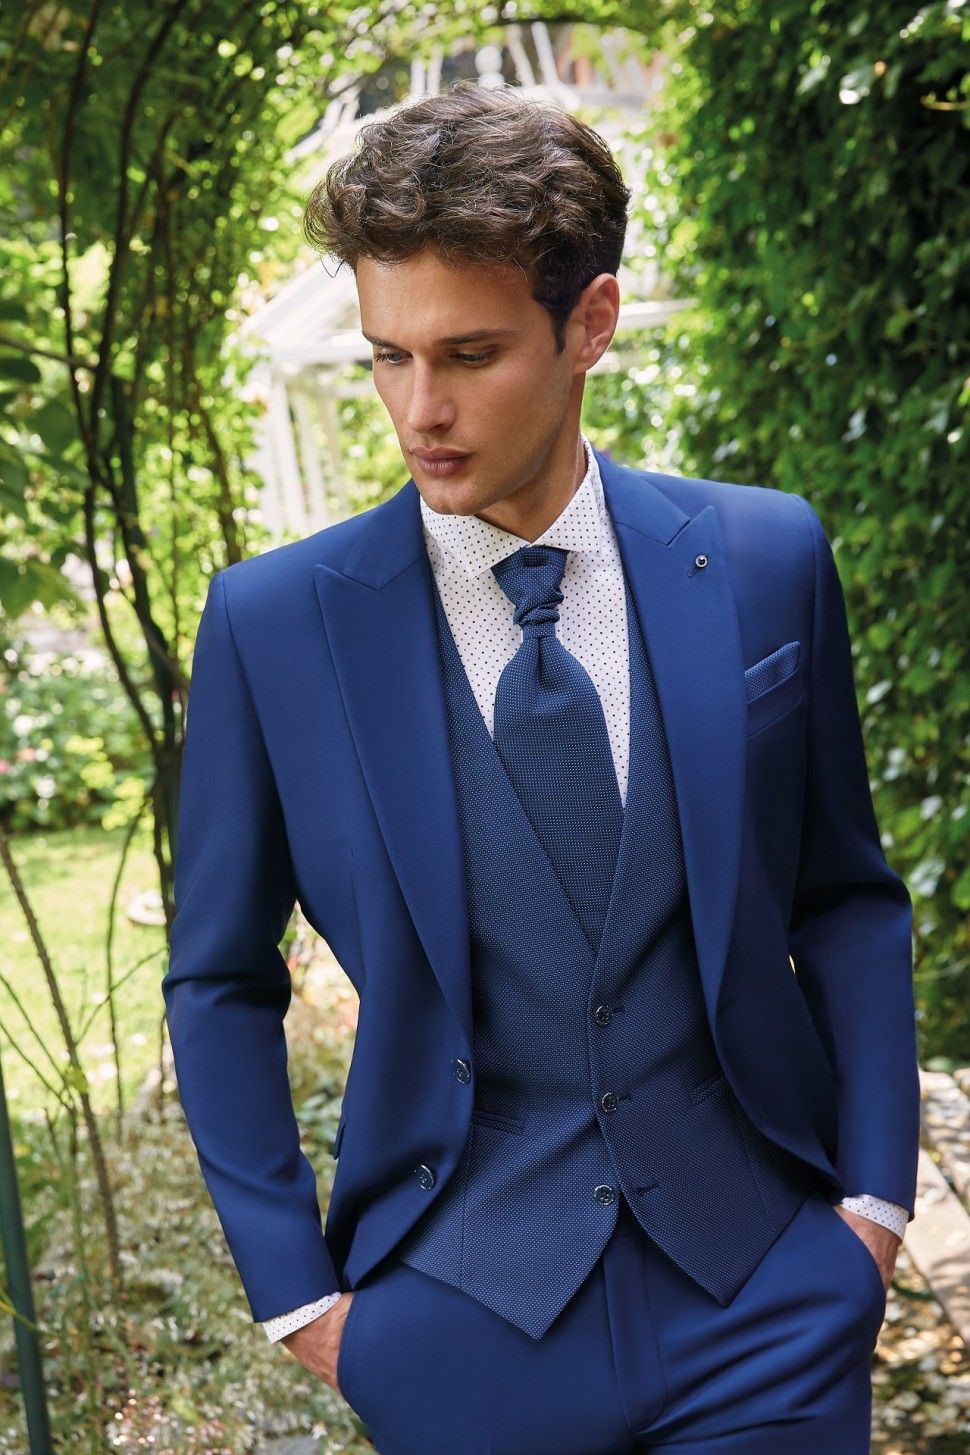 The coolest shops to find your groom’s suit